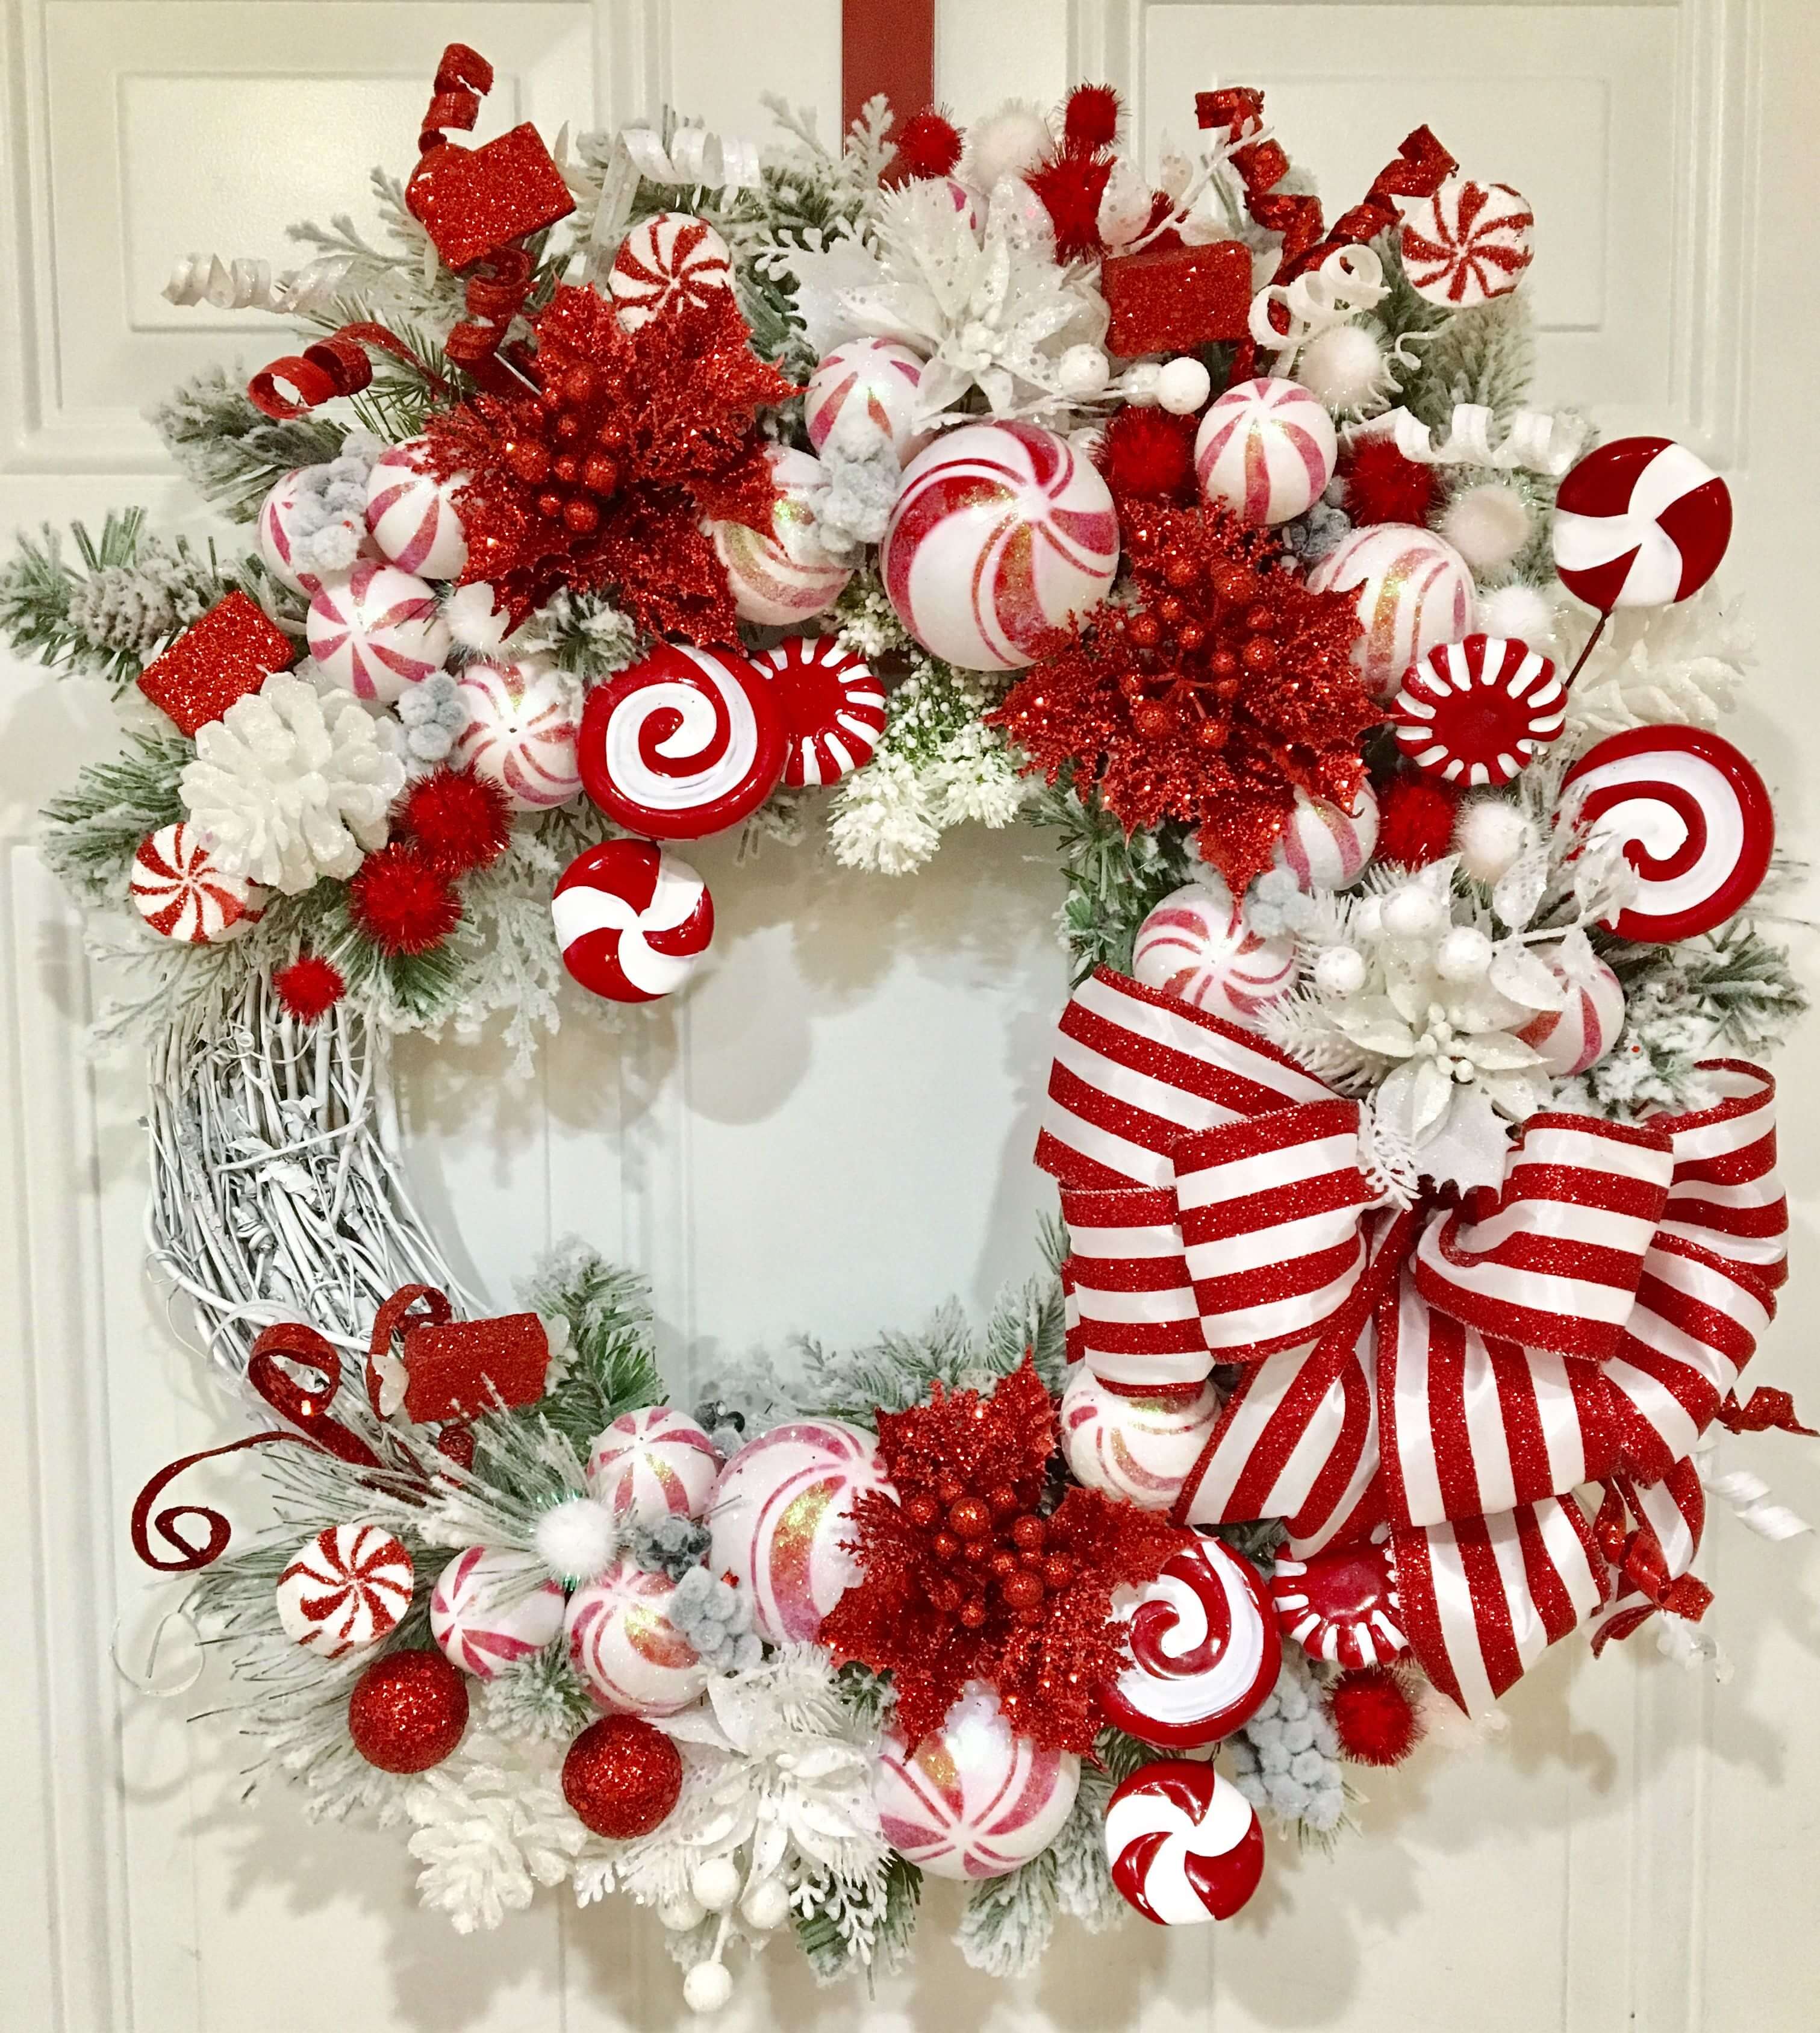  Festive Wreaths Christmas decorations without a tree